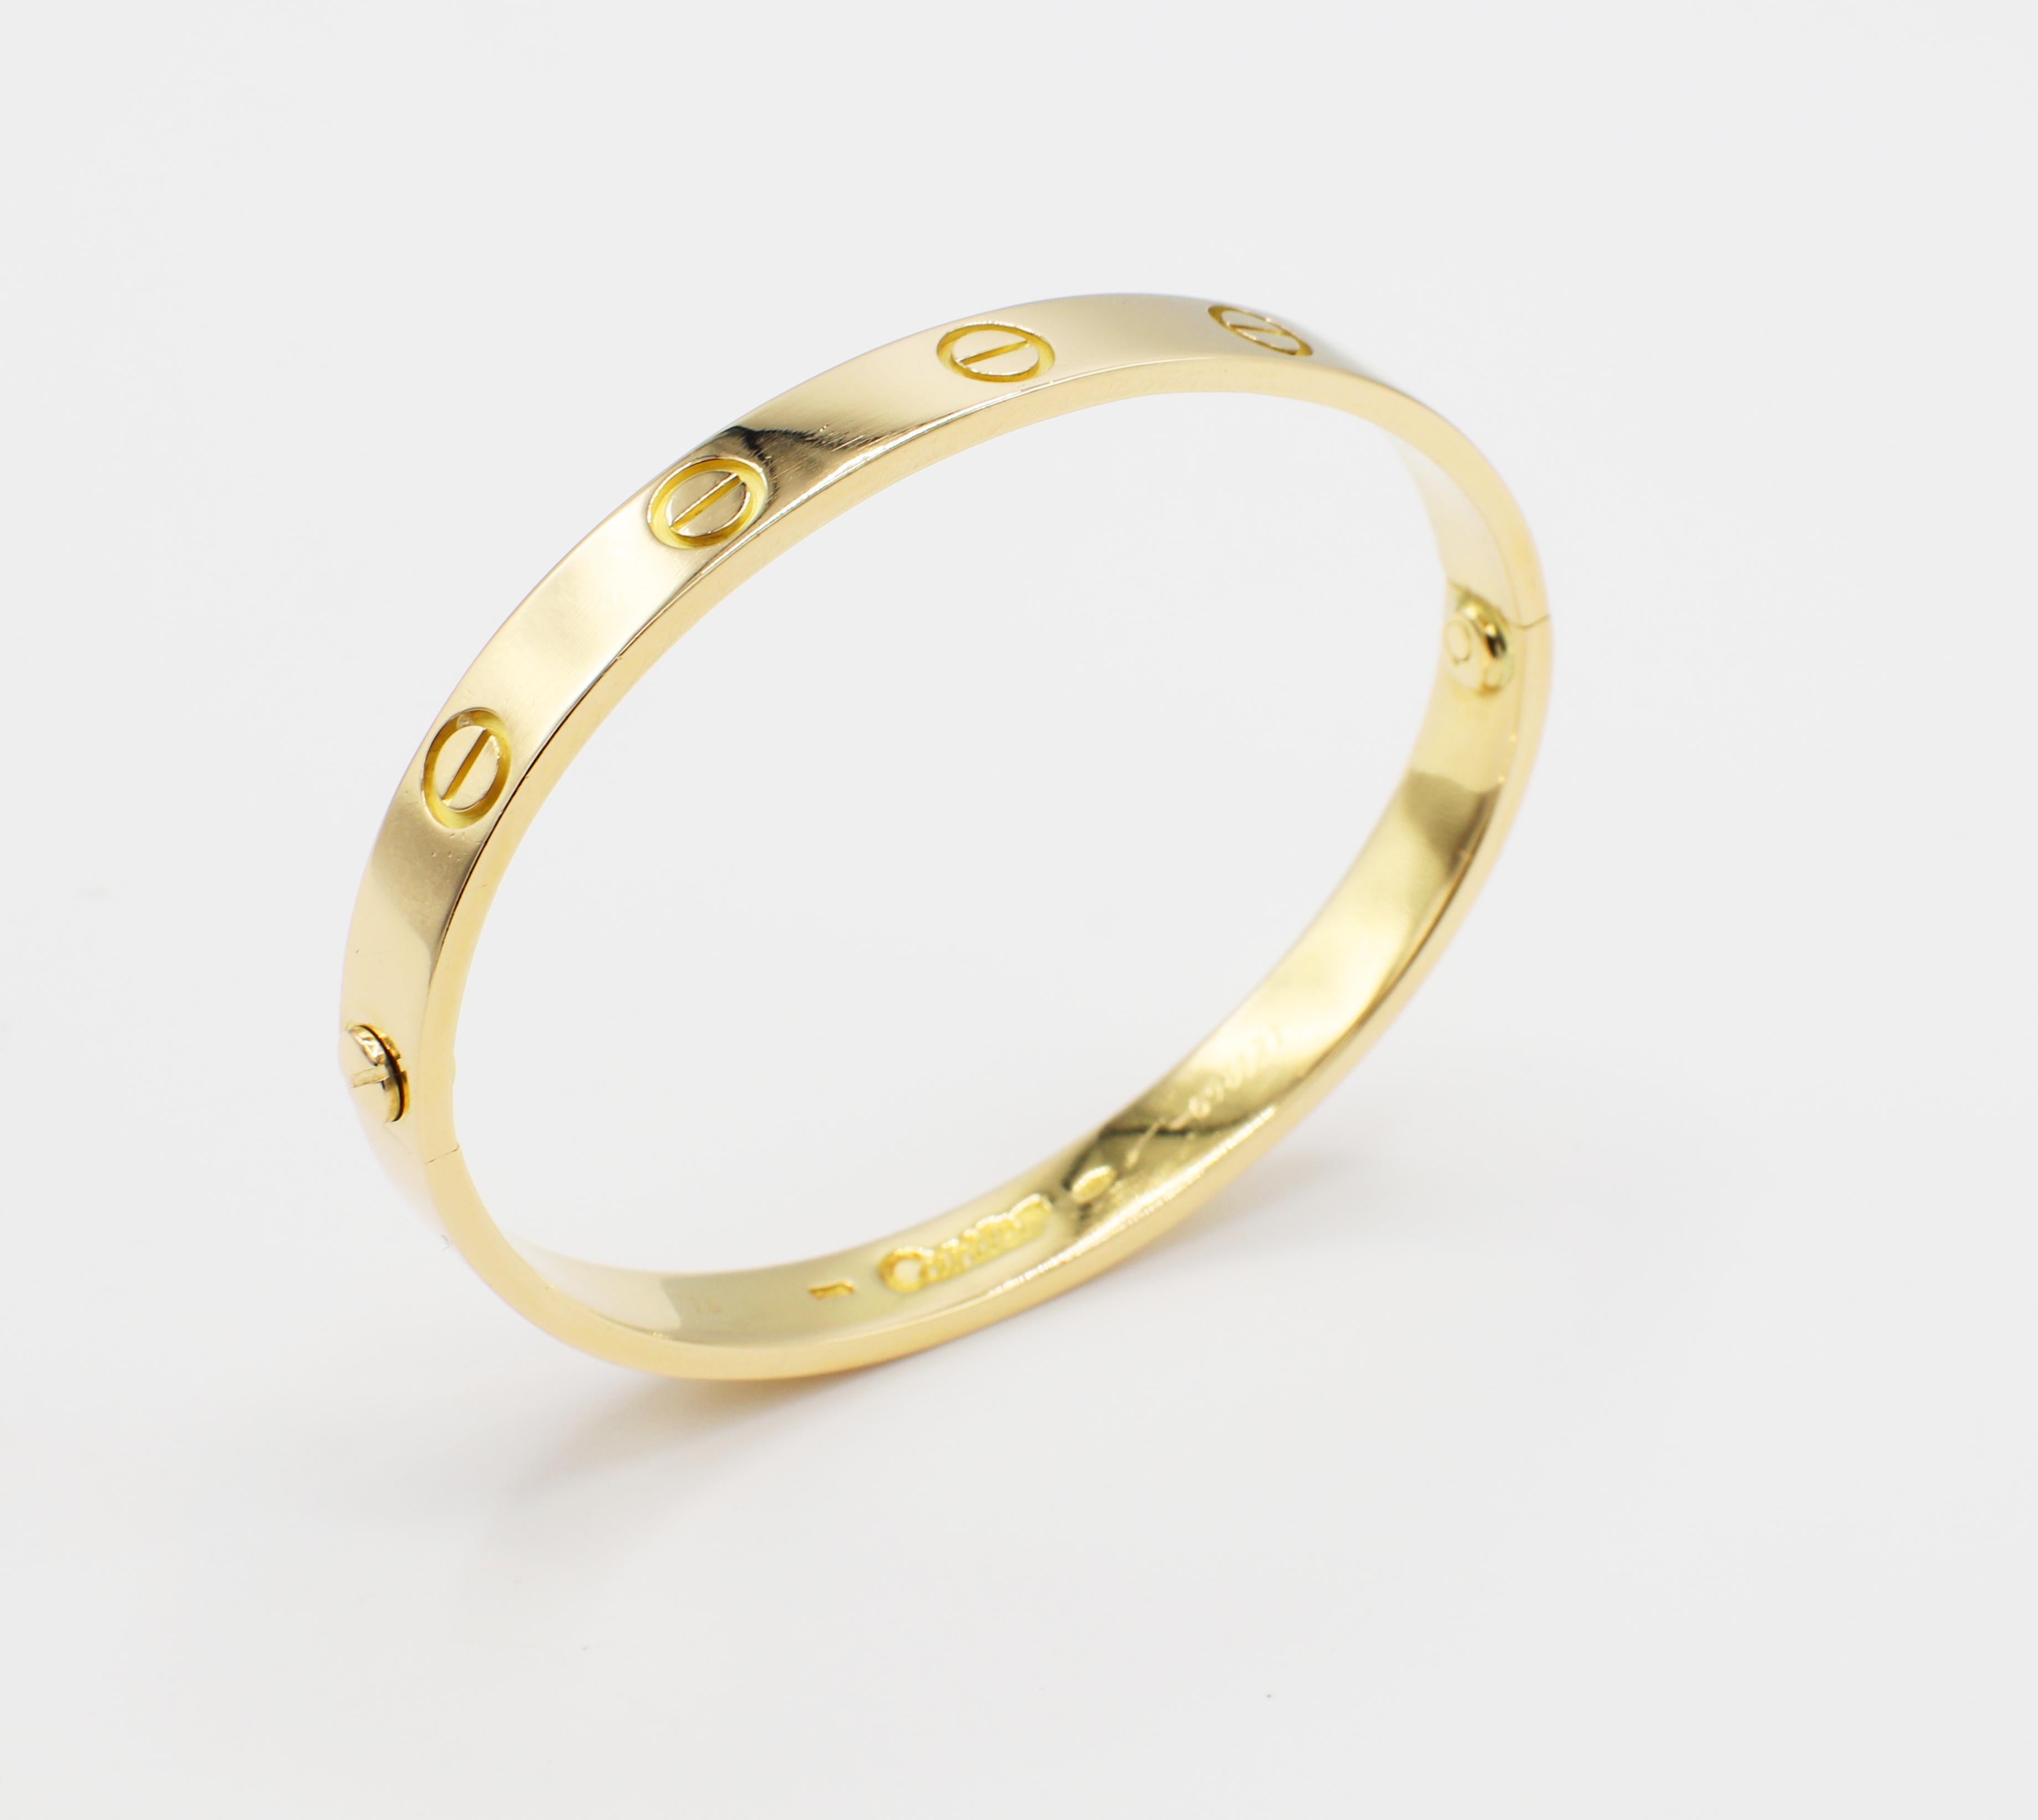 Cartier Love Bracelet Yellow Gold Size 16 
Metal: 18 karat yellow gold
Weight: 27.1 grams
Size: 16
Width: 6.1MM
Original screw system (screws come out) 
*Screw driver not included